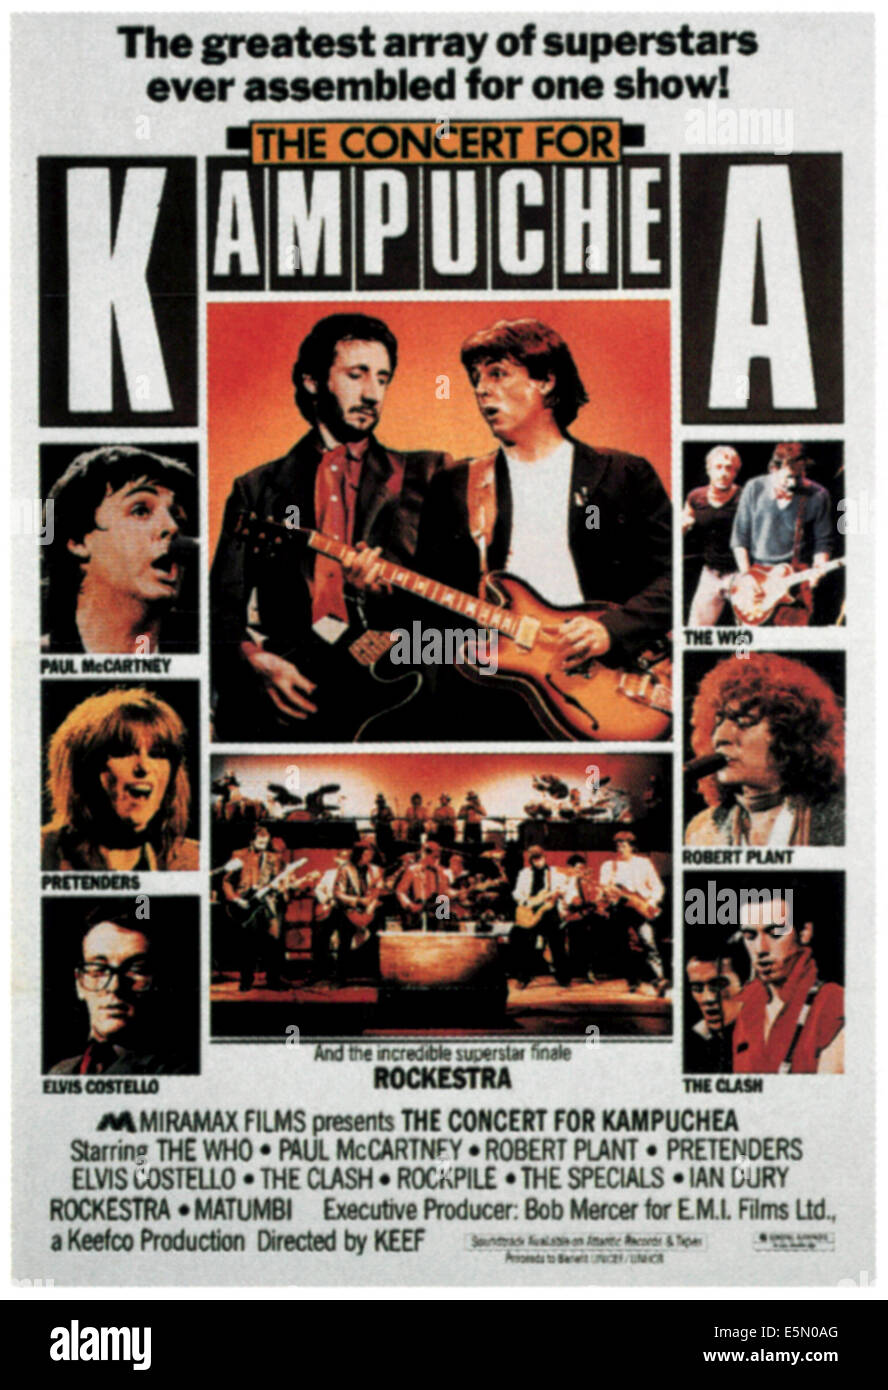 THE CONCERT FOR KAMPUCHEA, center from left: Pete Townshend, Paul McCartney, left from top: Paul McCartney, Chrissie Hynde, Stock Photo